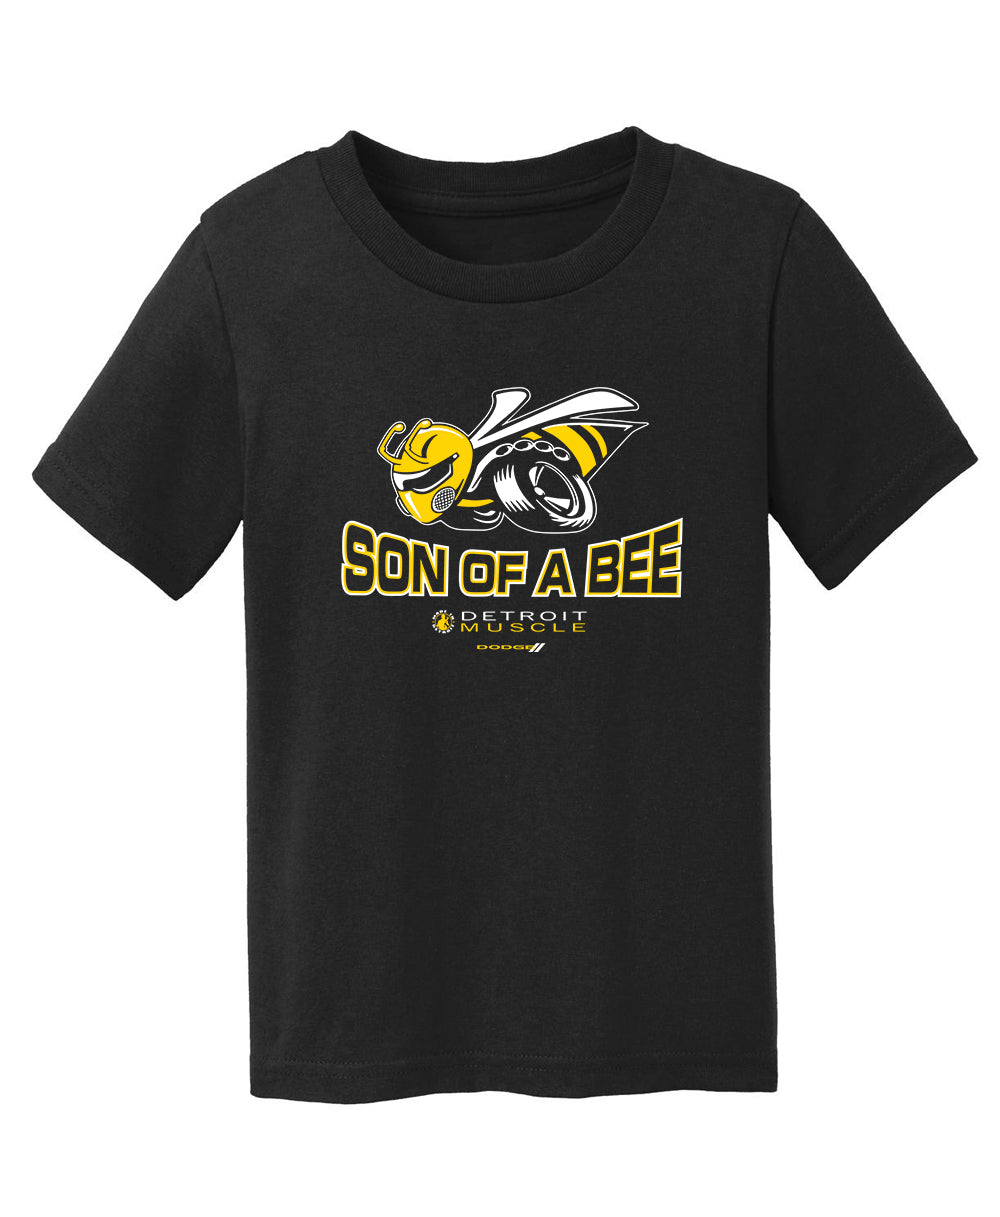 Dodge Son of a Bee - Toddler Tee